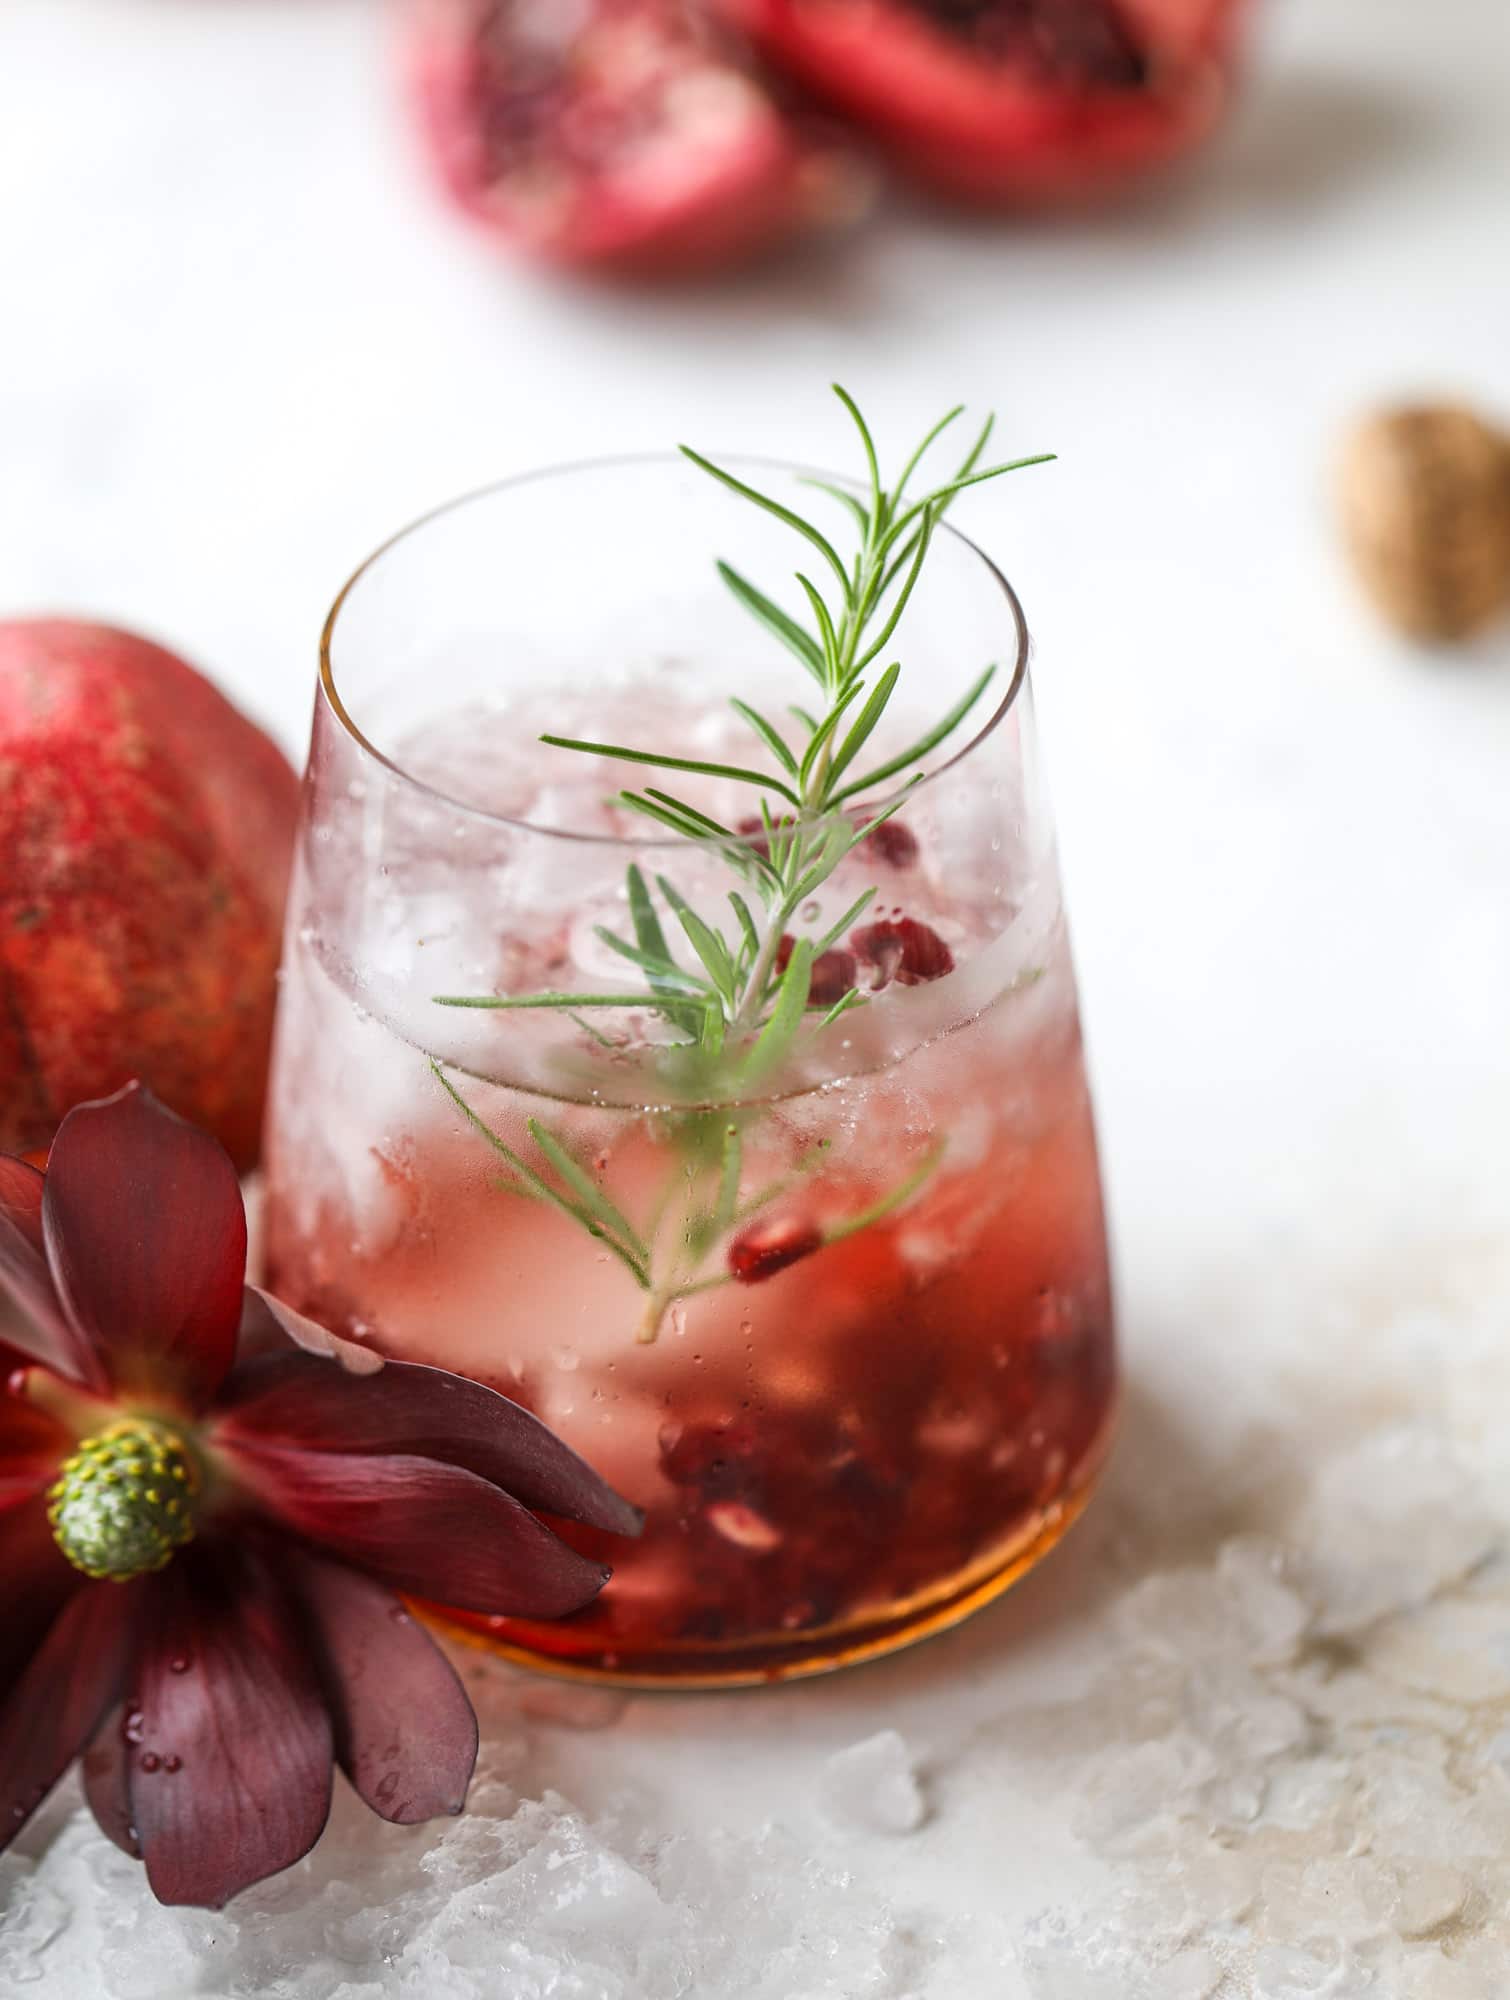 The pomegranate smash cocktail is a great drink for fall, Thanksgiving and the holiday season. Pomegranate juice, vodka and prosecco create a bubbly delicious drink that is garnished with pomegranate arils and rosemary. So festive! I howsweeteats.com #pomegranate #smash